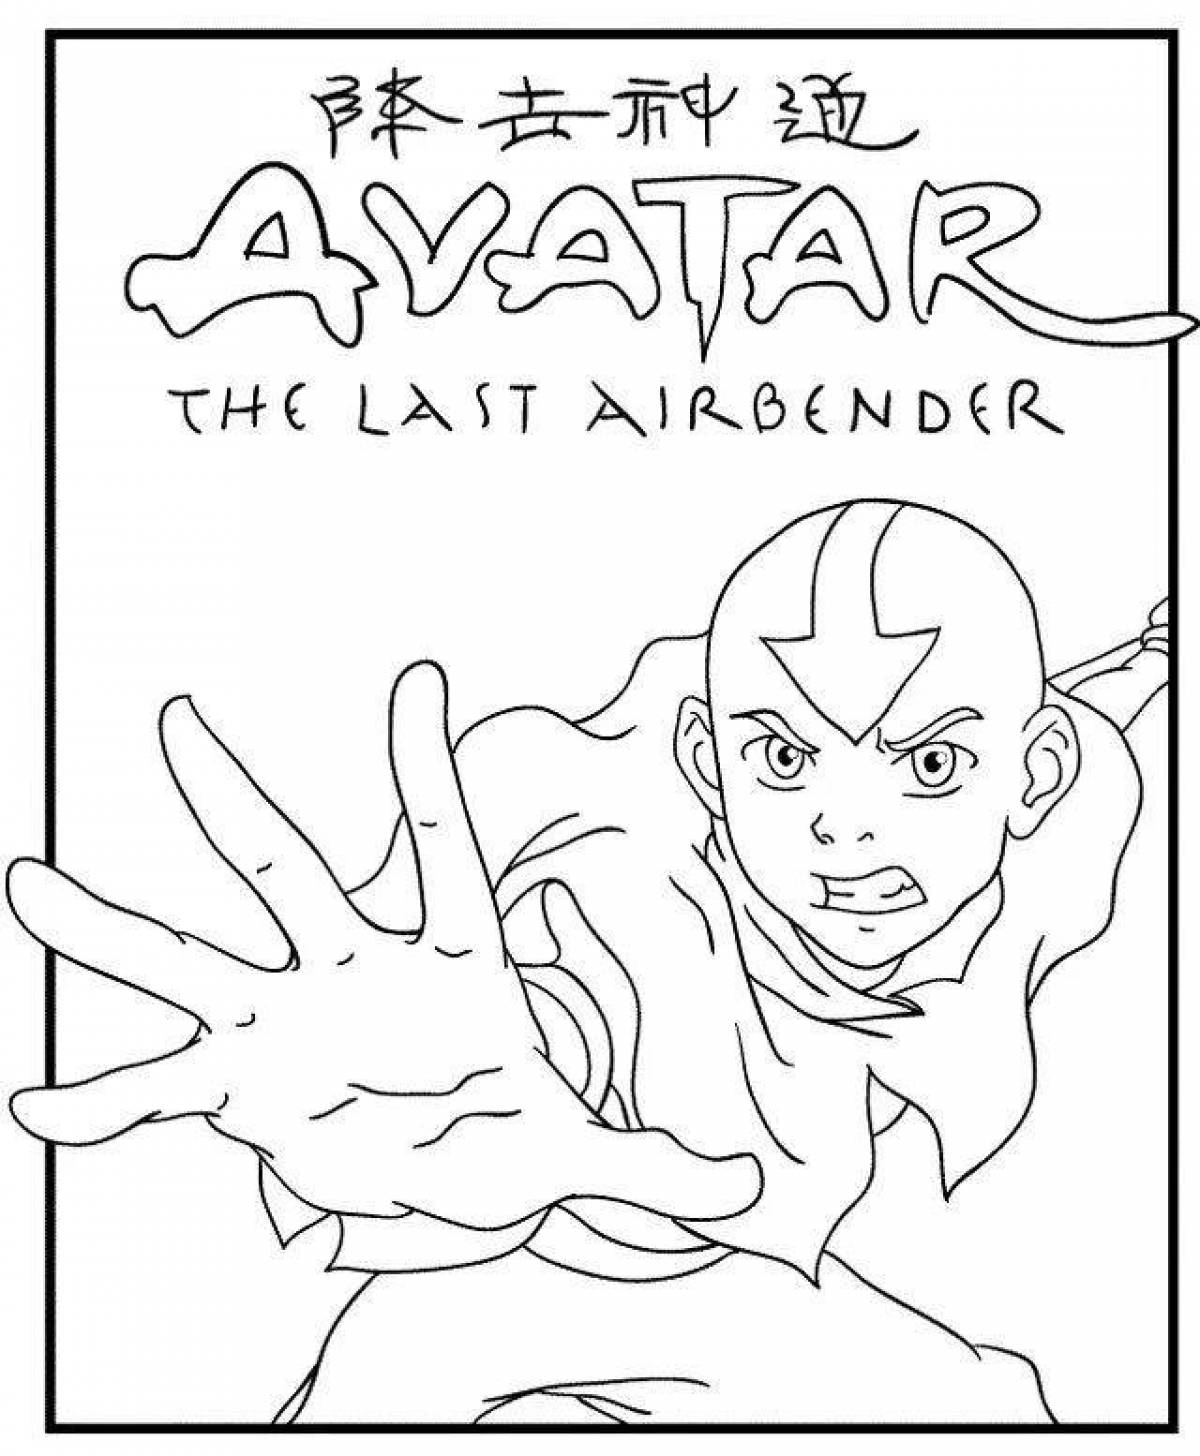 Colored Avatar: The Last Airbender Coloring Page